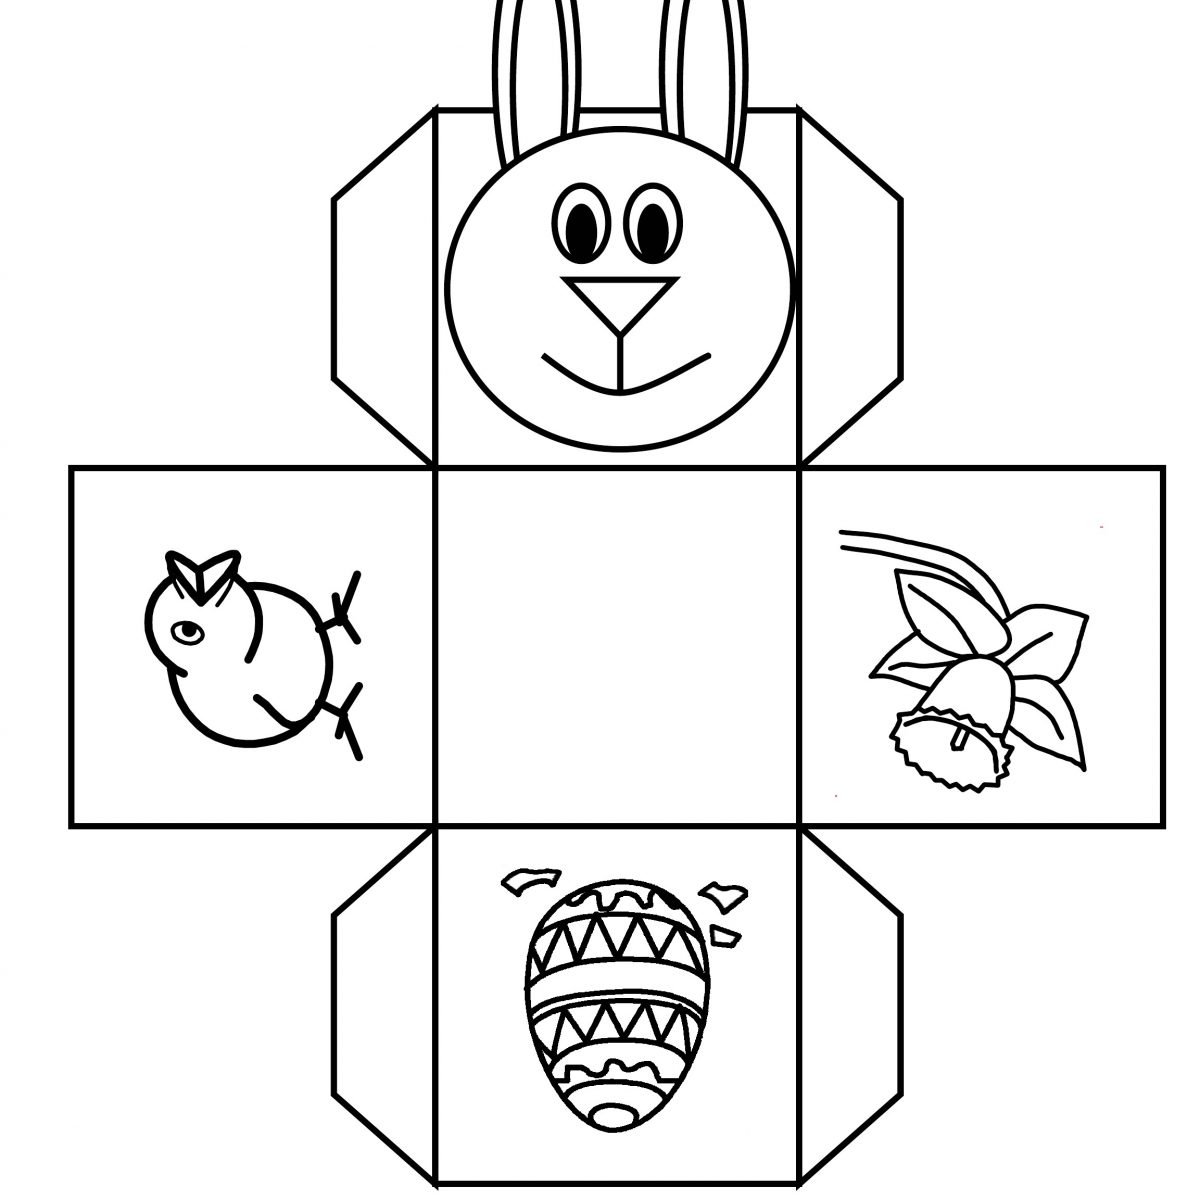 Easter Basket Templates To Print – Hd Easter Images - Free Printable Easter Egg Basket Templates